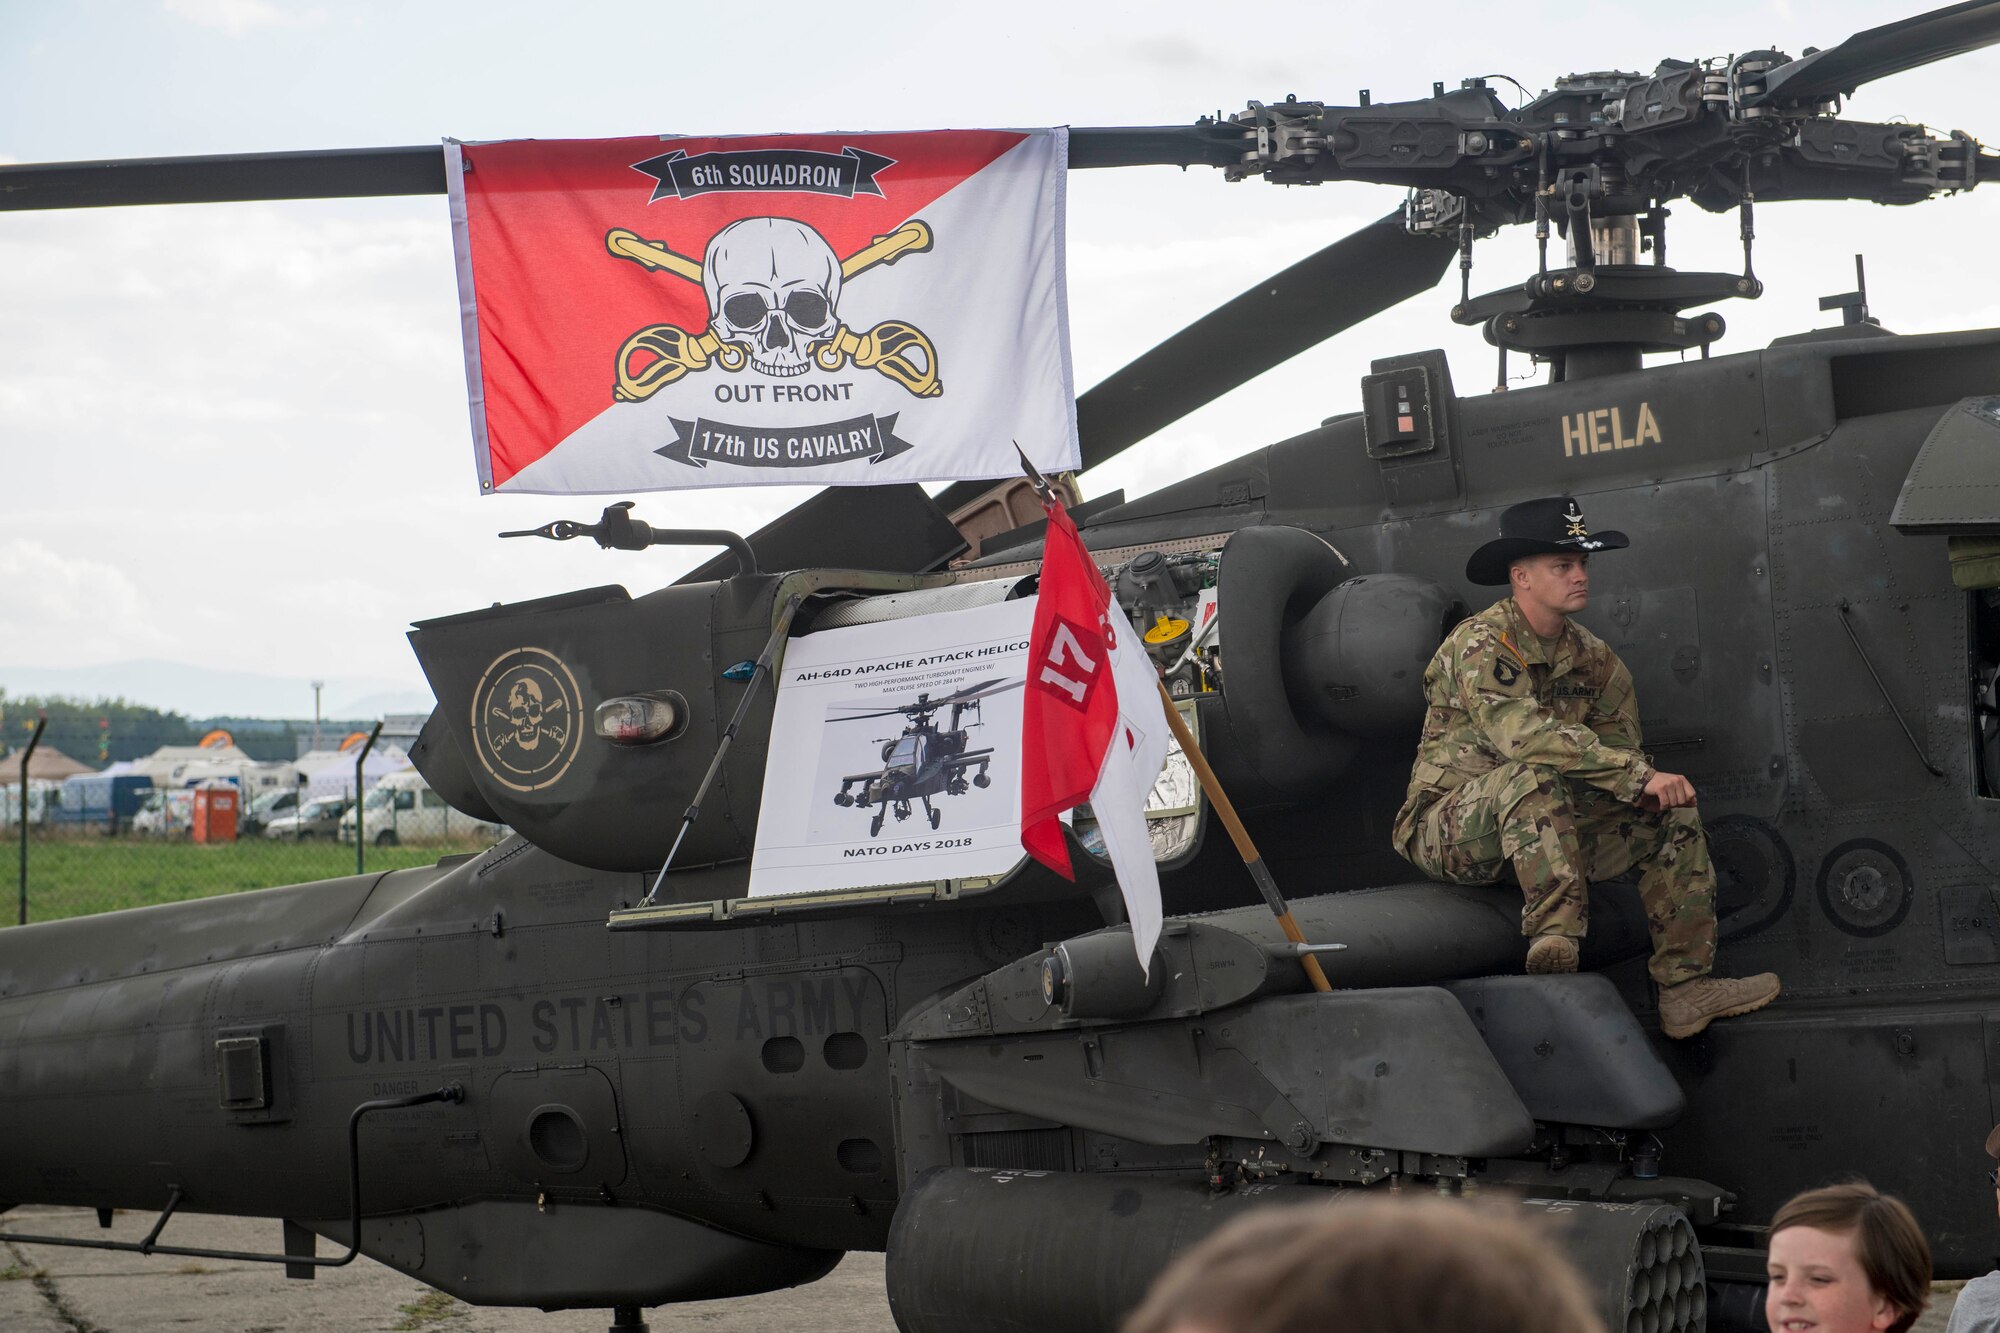 An AH-64D Apache Attack Helicopter, assigned to the 6th Squadron, 17th Cavalry Regiment, is on display at Ostrava Air Base, Czech Republic, during NATO Days. NATO Days is a Czech Republic-led air show and exhibition that showcases military ground and aviation capabilities from 19 nations. Participation in NATO Days increases our understanding of European ally and partner capabilities, greatly enhancing our ability to operate together as a team. (U.S. Navy photo by Mass Communication Specialist 2nd Class Robert J. Baldock)